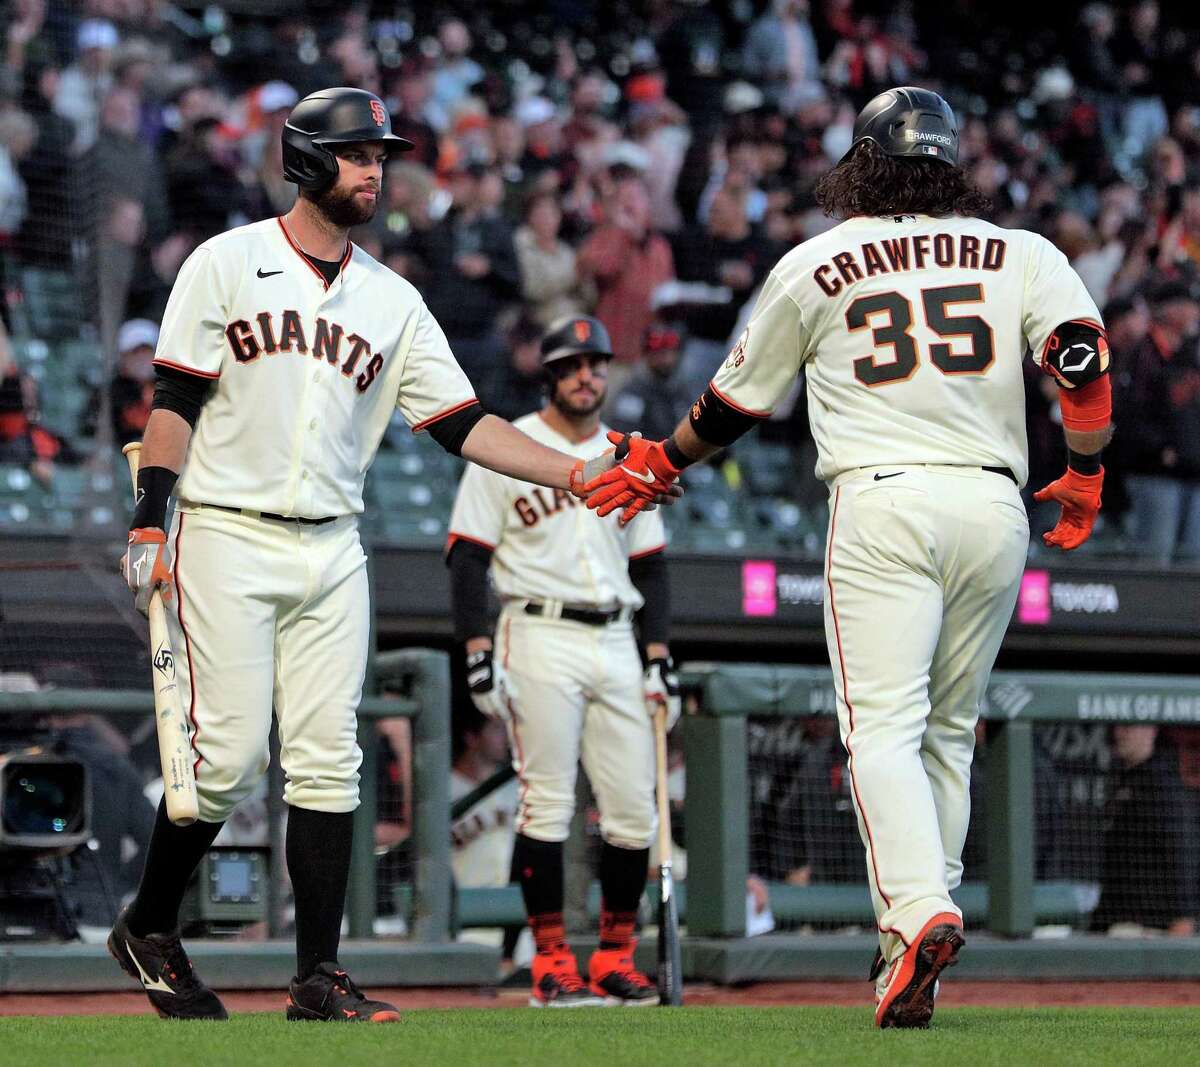 Brandon Belt (9) high fives Brandon Crawford (35) after he rounded the bases following his two-run homerun in the fifth inning as the San Francisco Giants played the Arizona Diamondbacks at Oracle Park in San Francisco, Calif., on Monday, June 14, 2021.